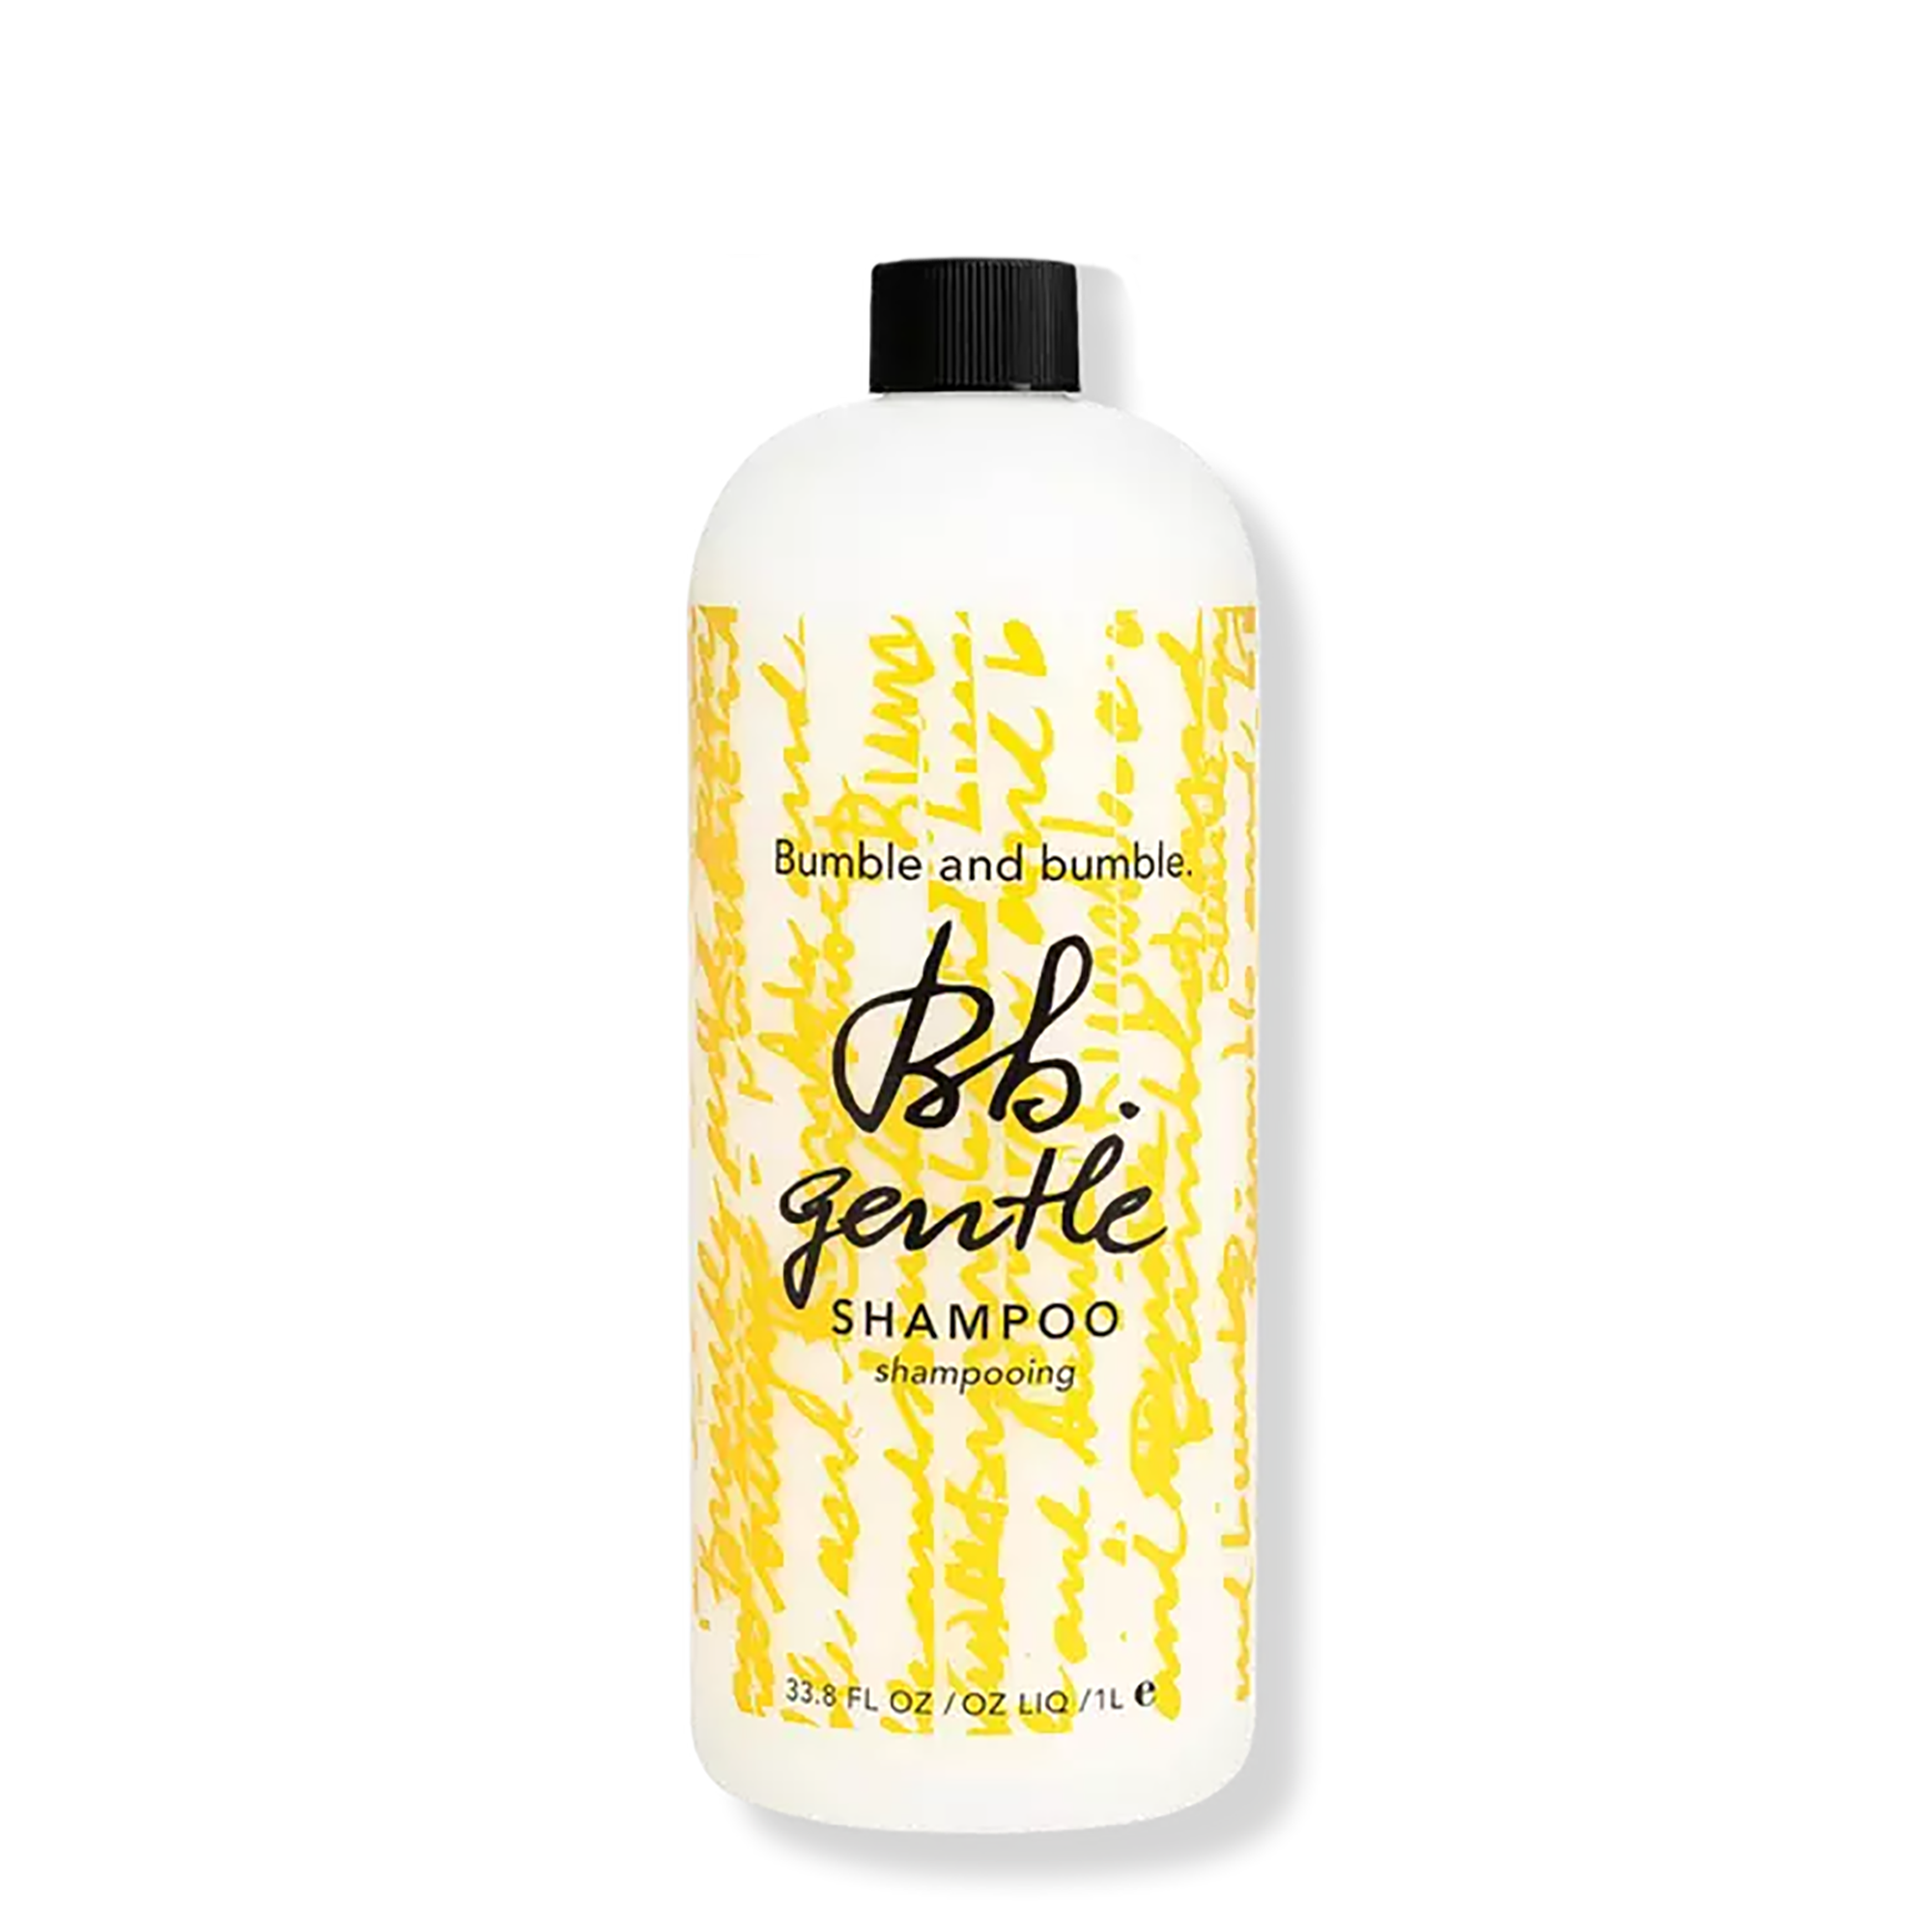 Bumble and bumble Gentle Shampoo / 33OZ